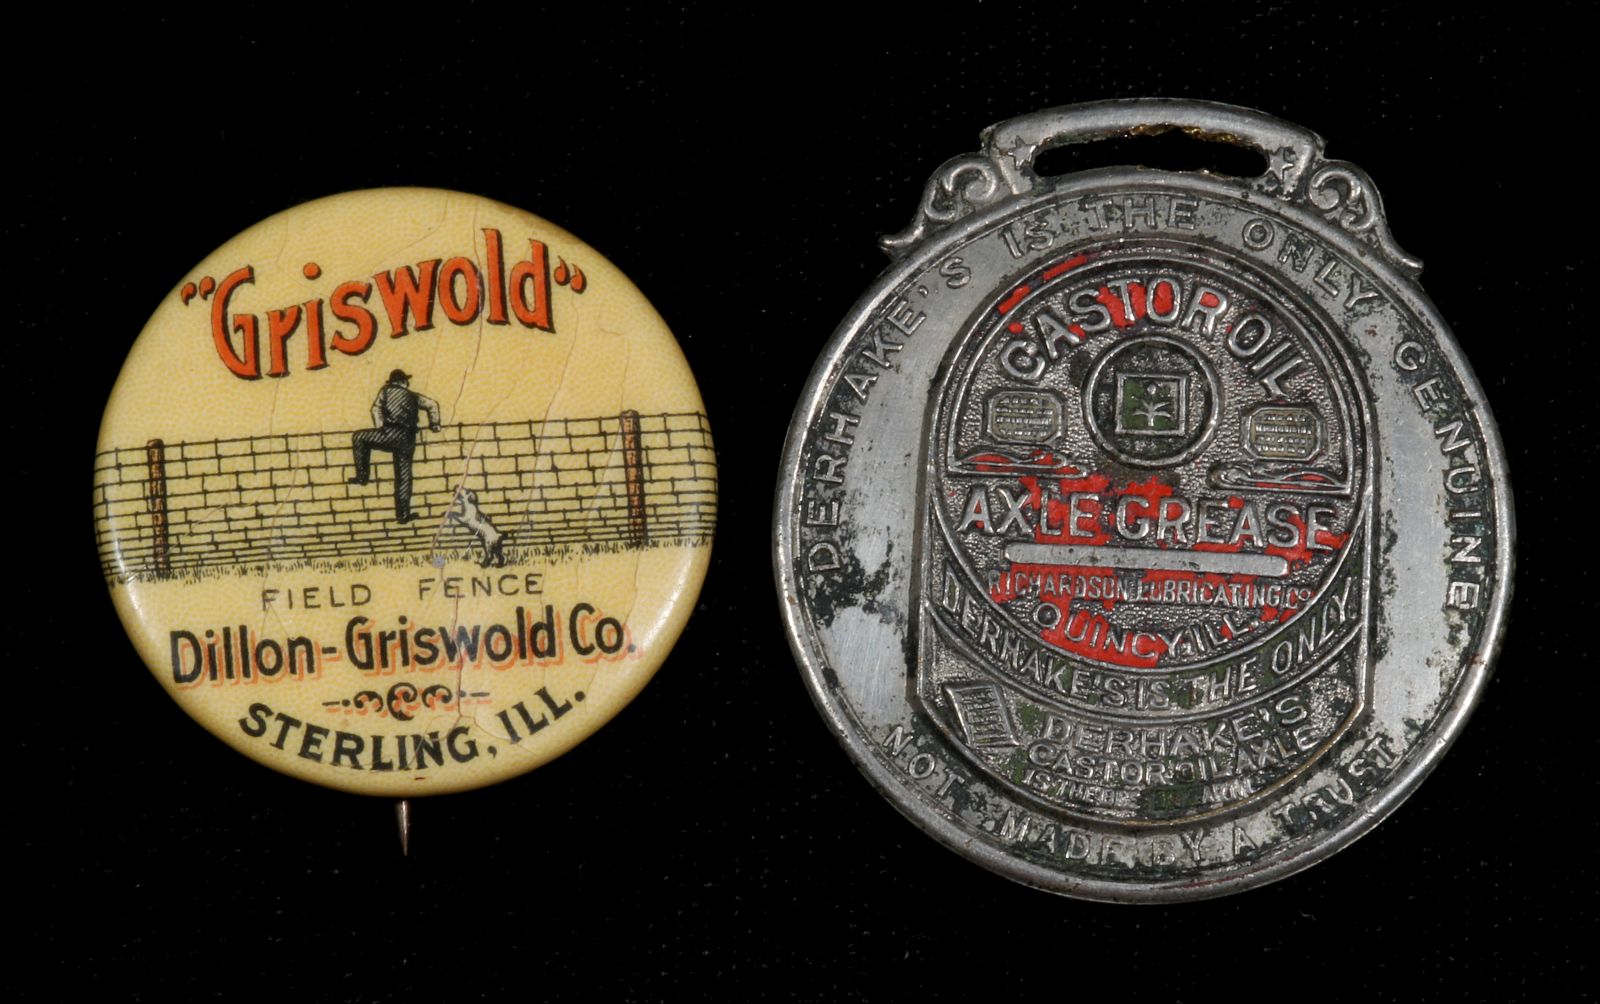 GRISWOLD FENCE AND CASTOROIL ANTIQUE ADVERTISING